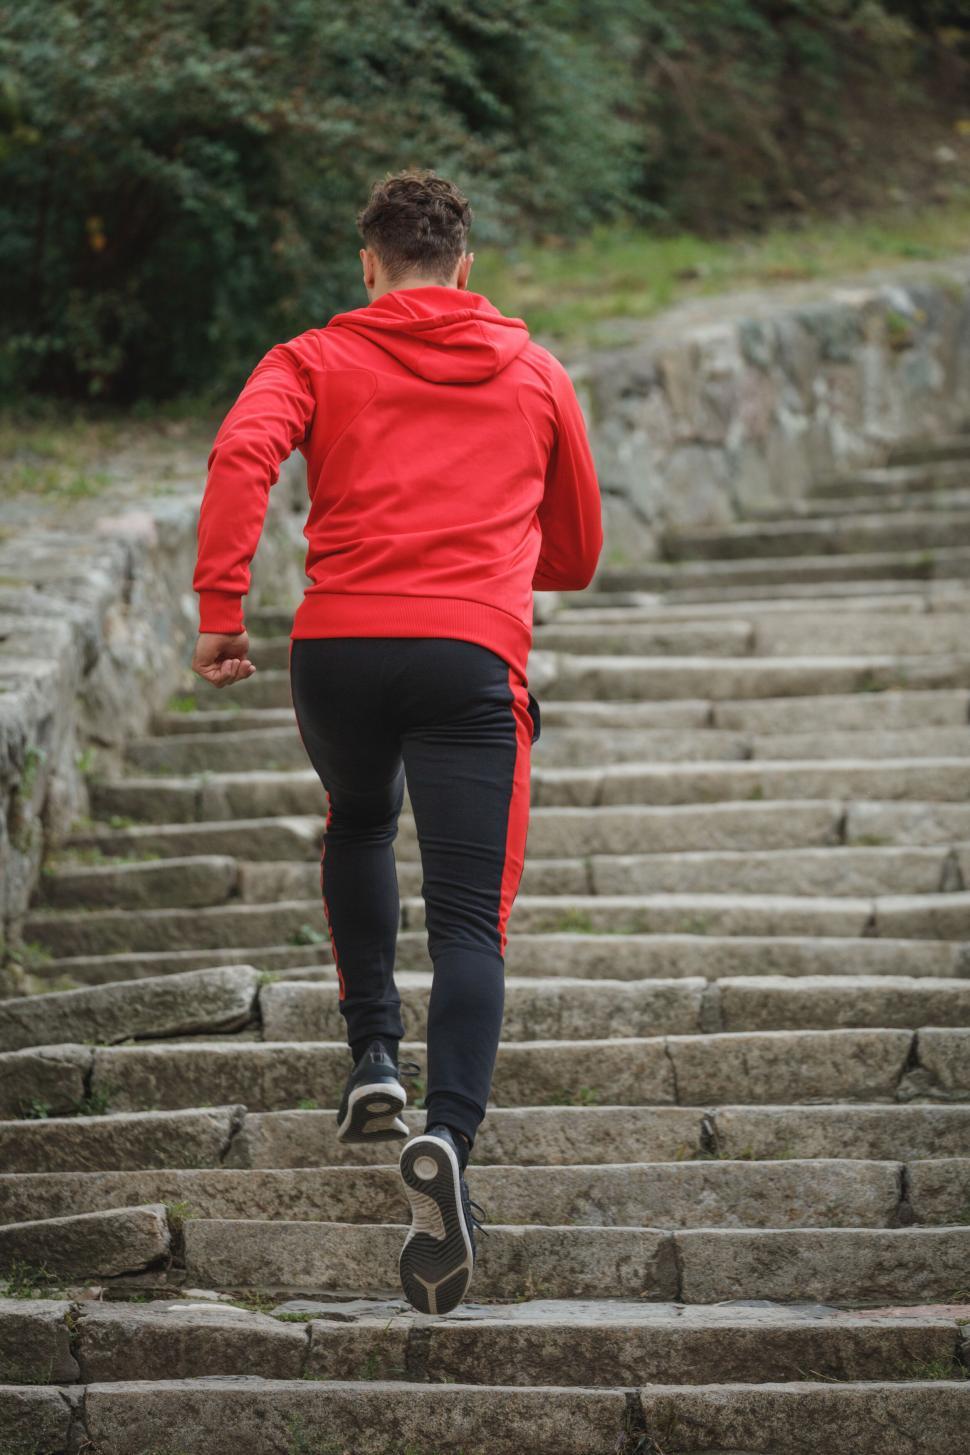 Free Image of Athlete ascending stairs during outdoor workout 